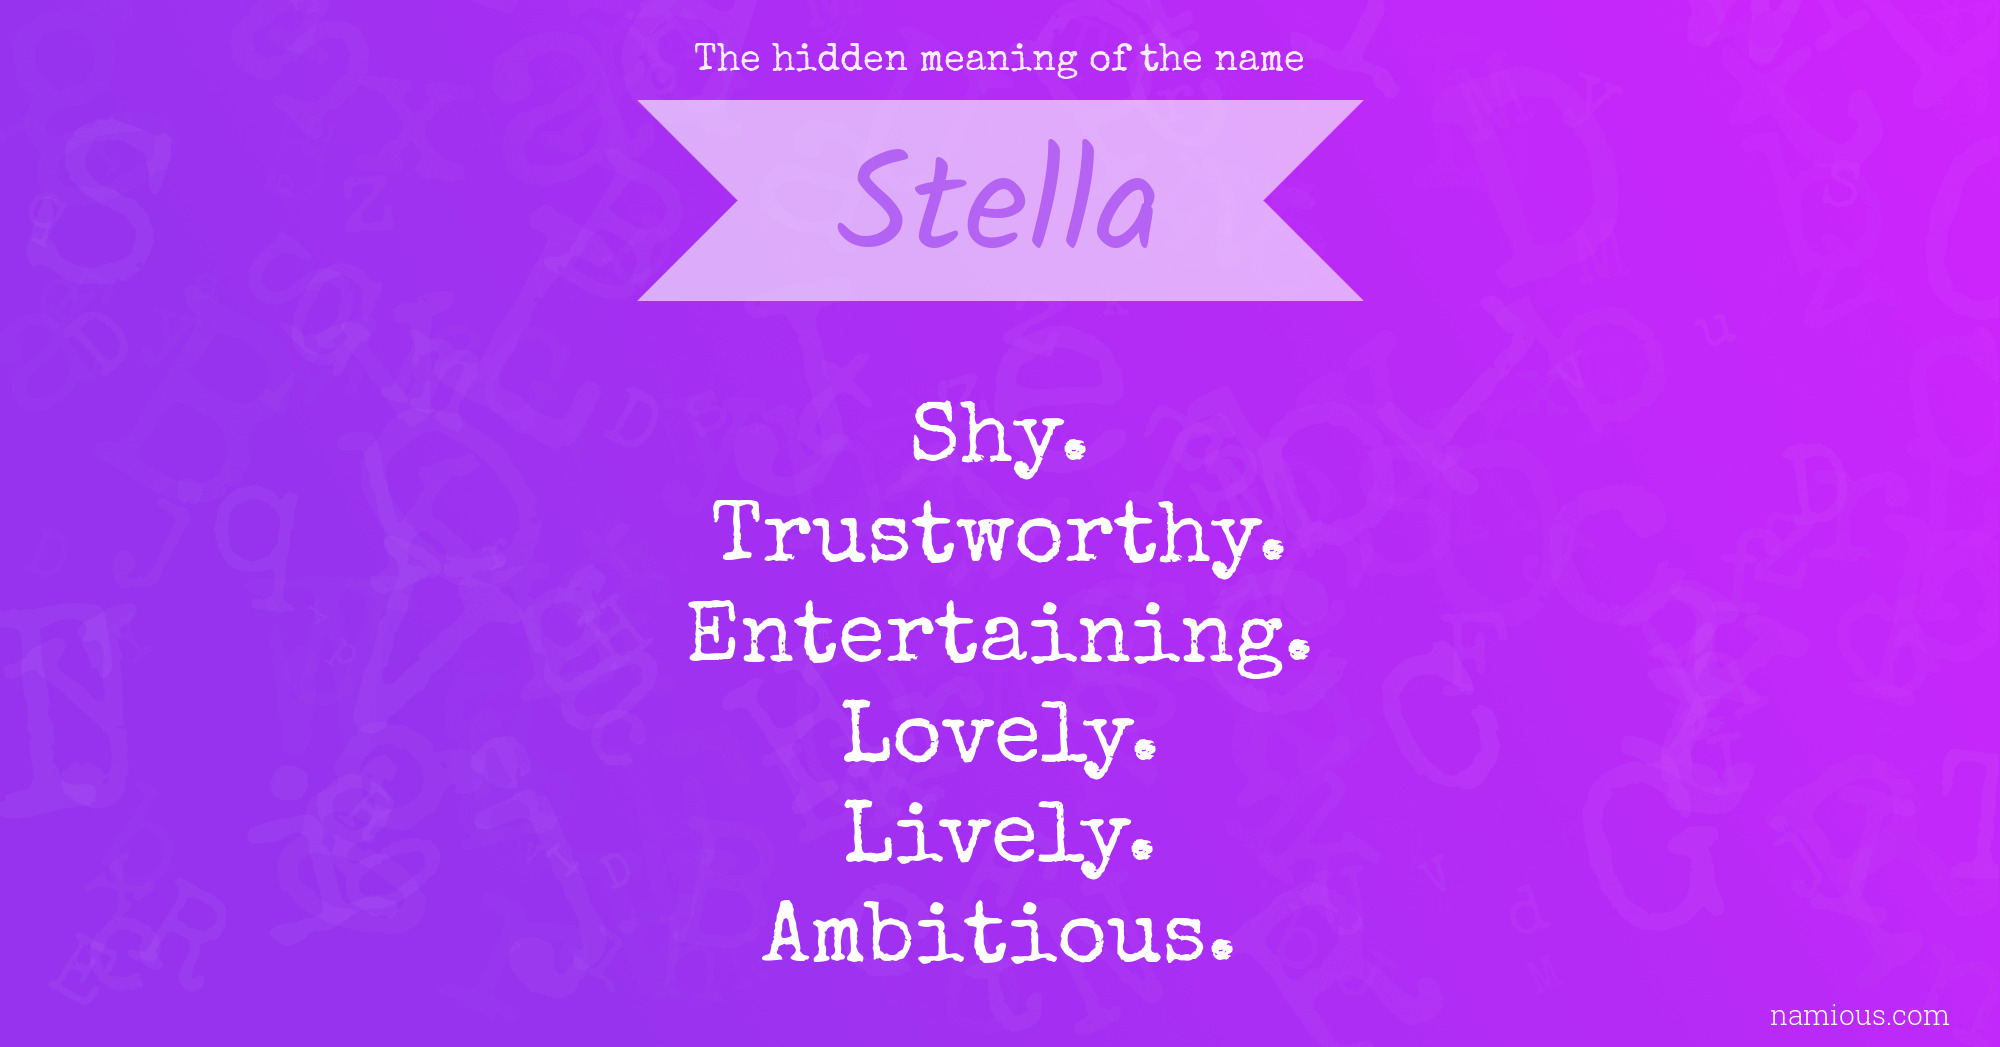 The hidden meaning of the name Stella